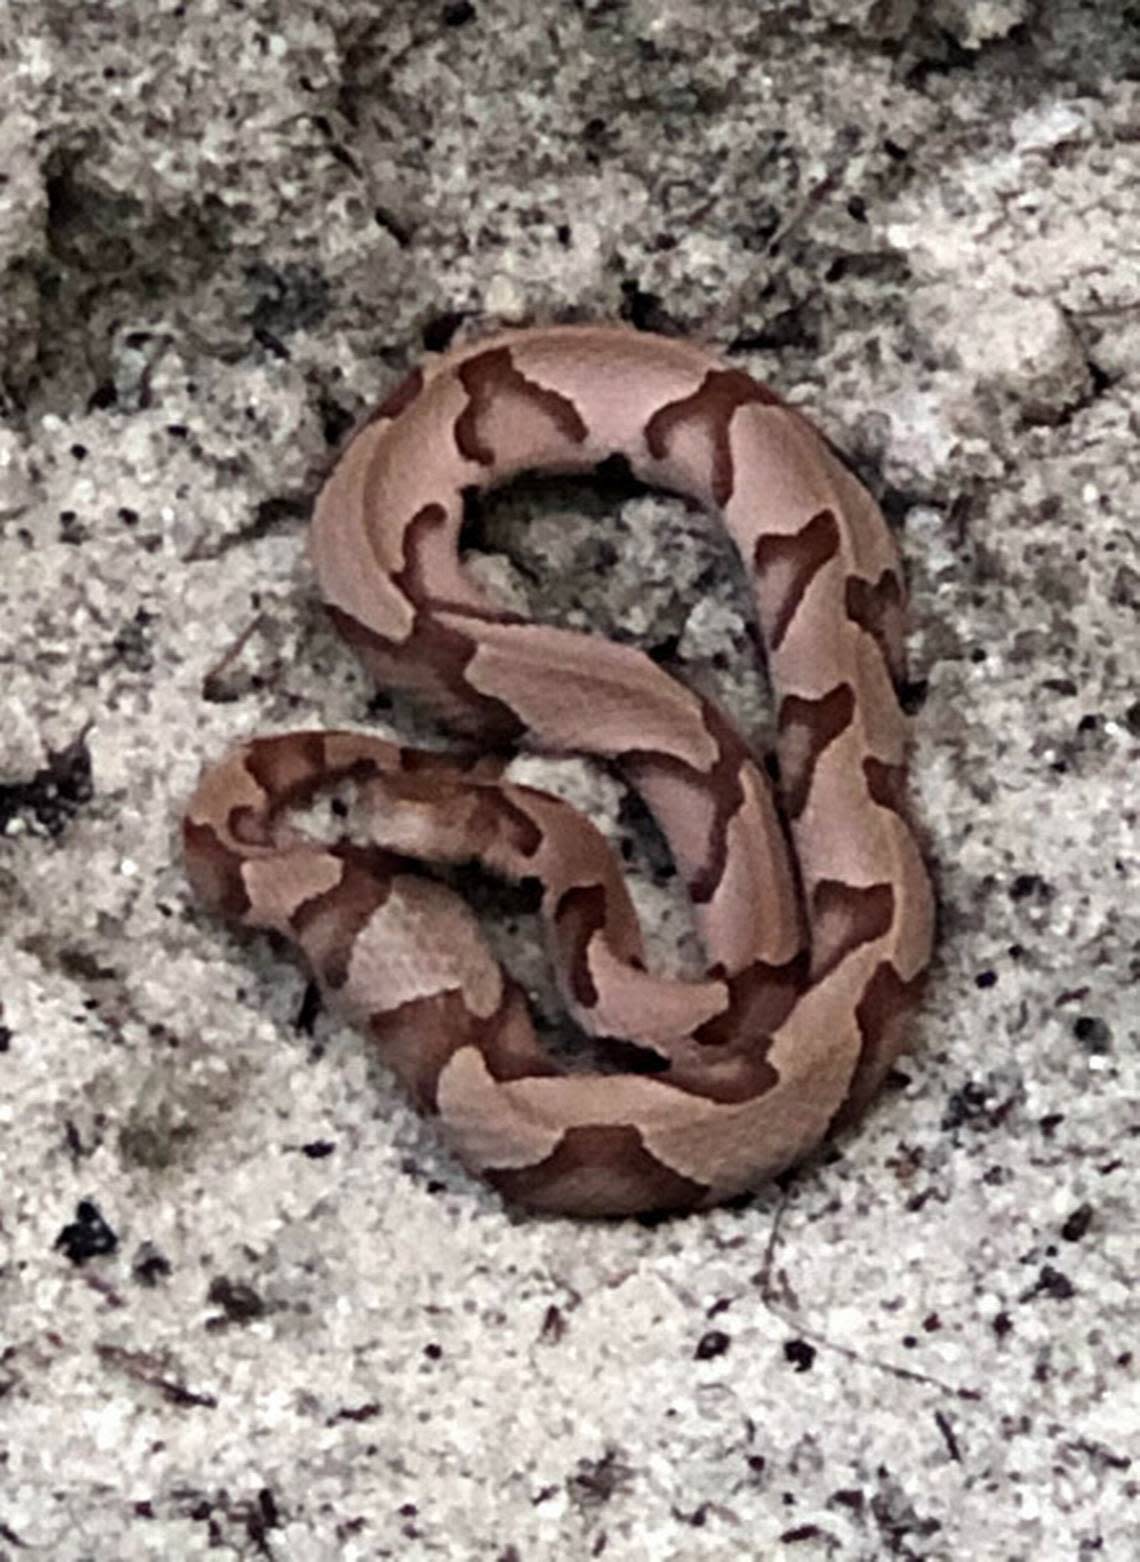 This large copperhead snake was spotted by Theresa Westerman in her backyard.